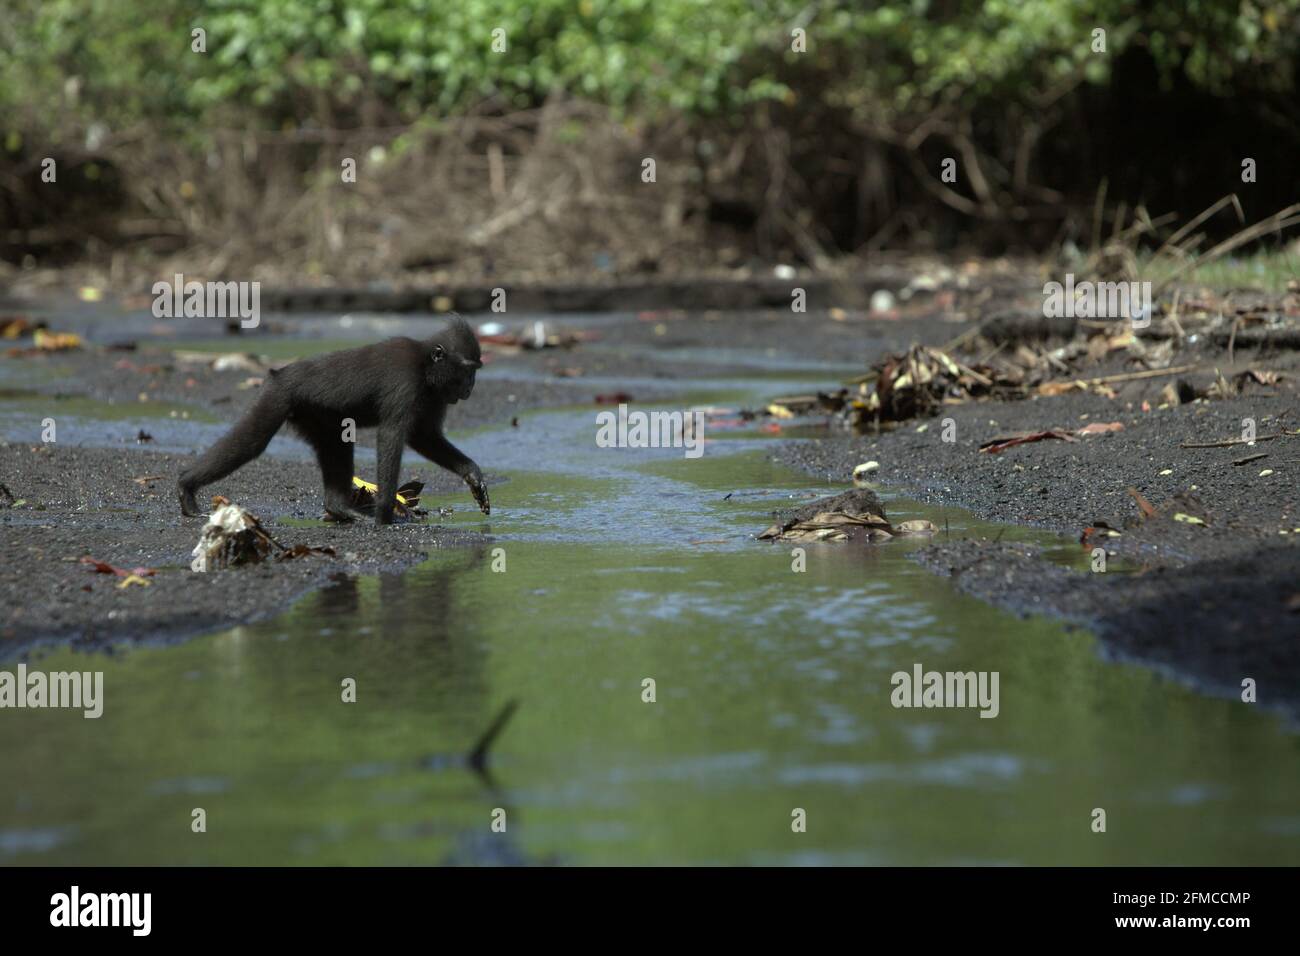 A Sulawesi black-crested macaque (Macaca nigra) is roaming on a stream, at a creek close to the beach in Tangkoko forest, North Sulawesi, Indonesia. Stock Photo